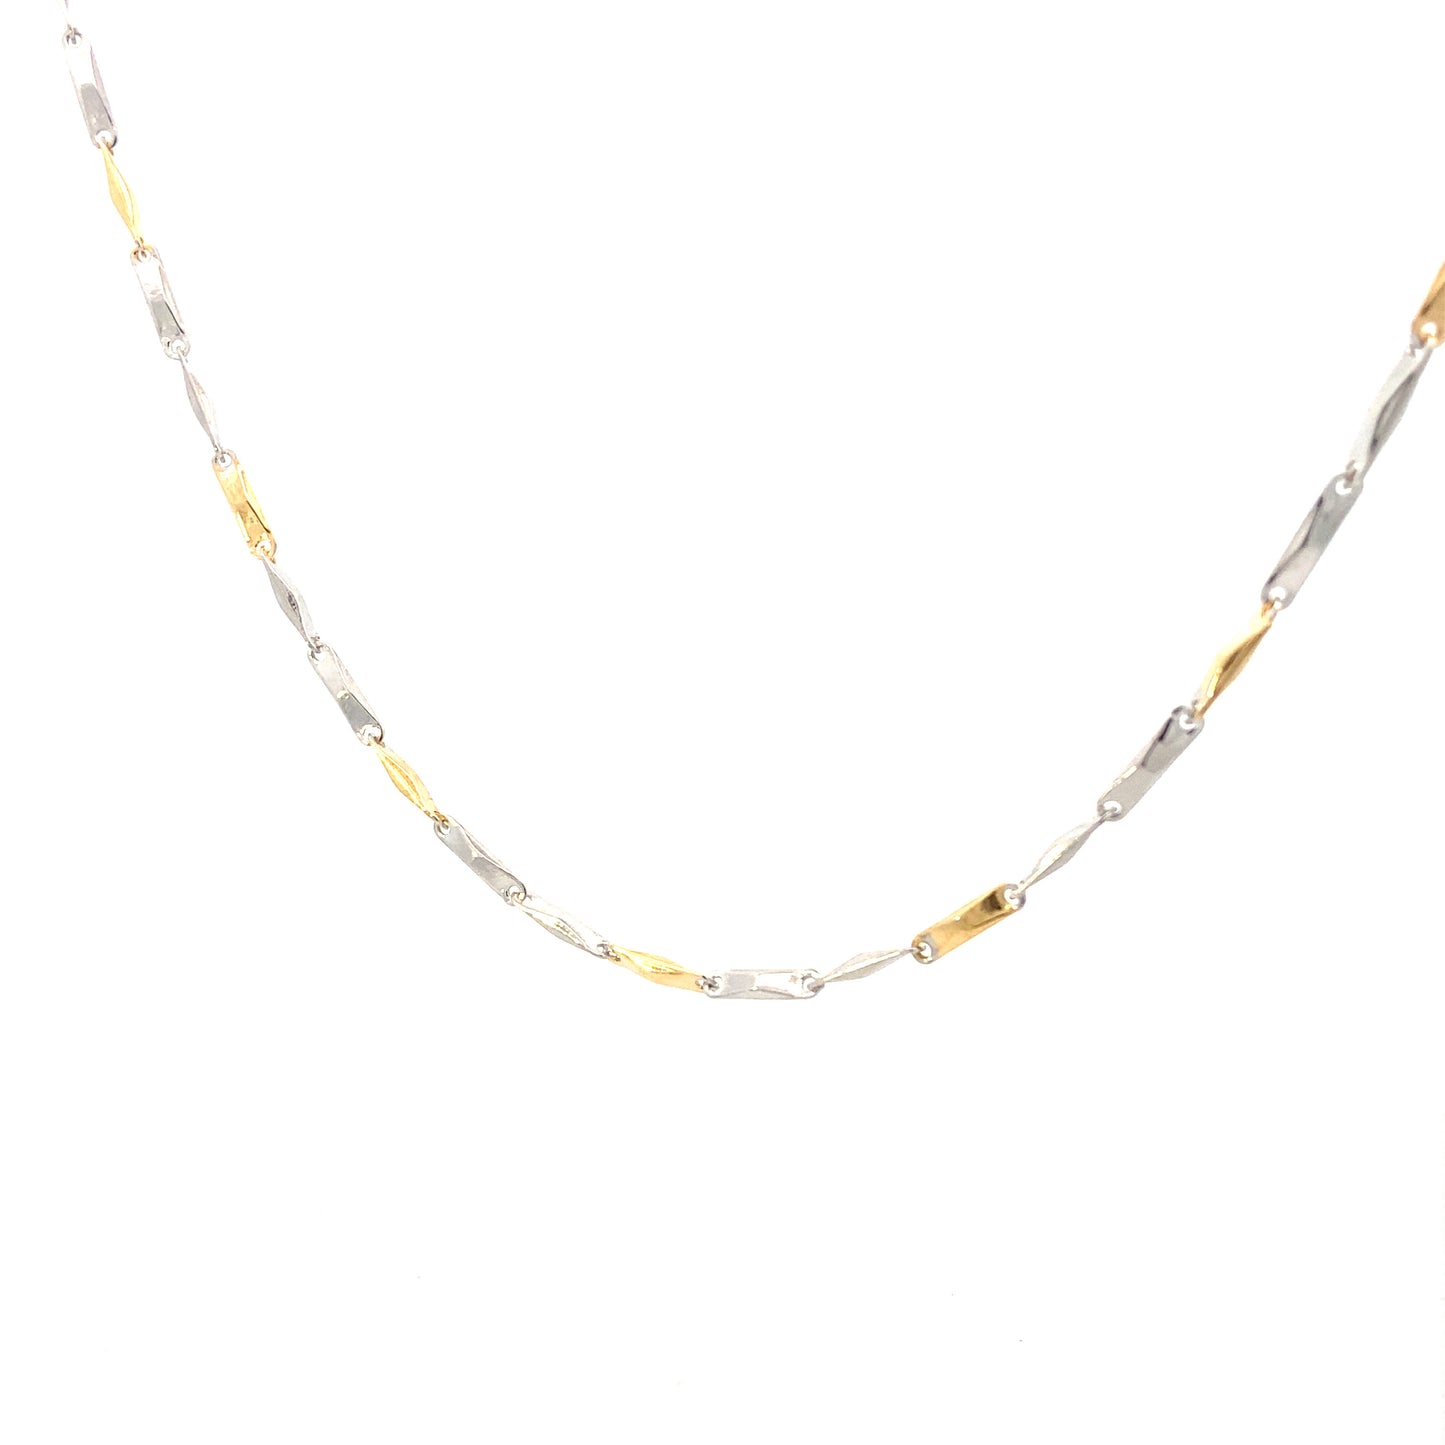 Marcello Pane  Elongated Link Necklace | Marcello Pane | Luby 